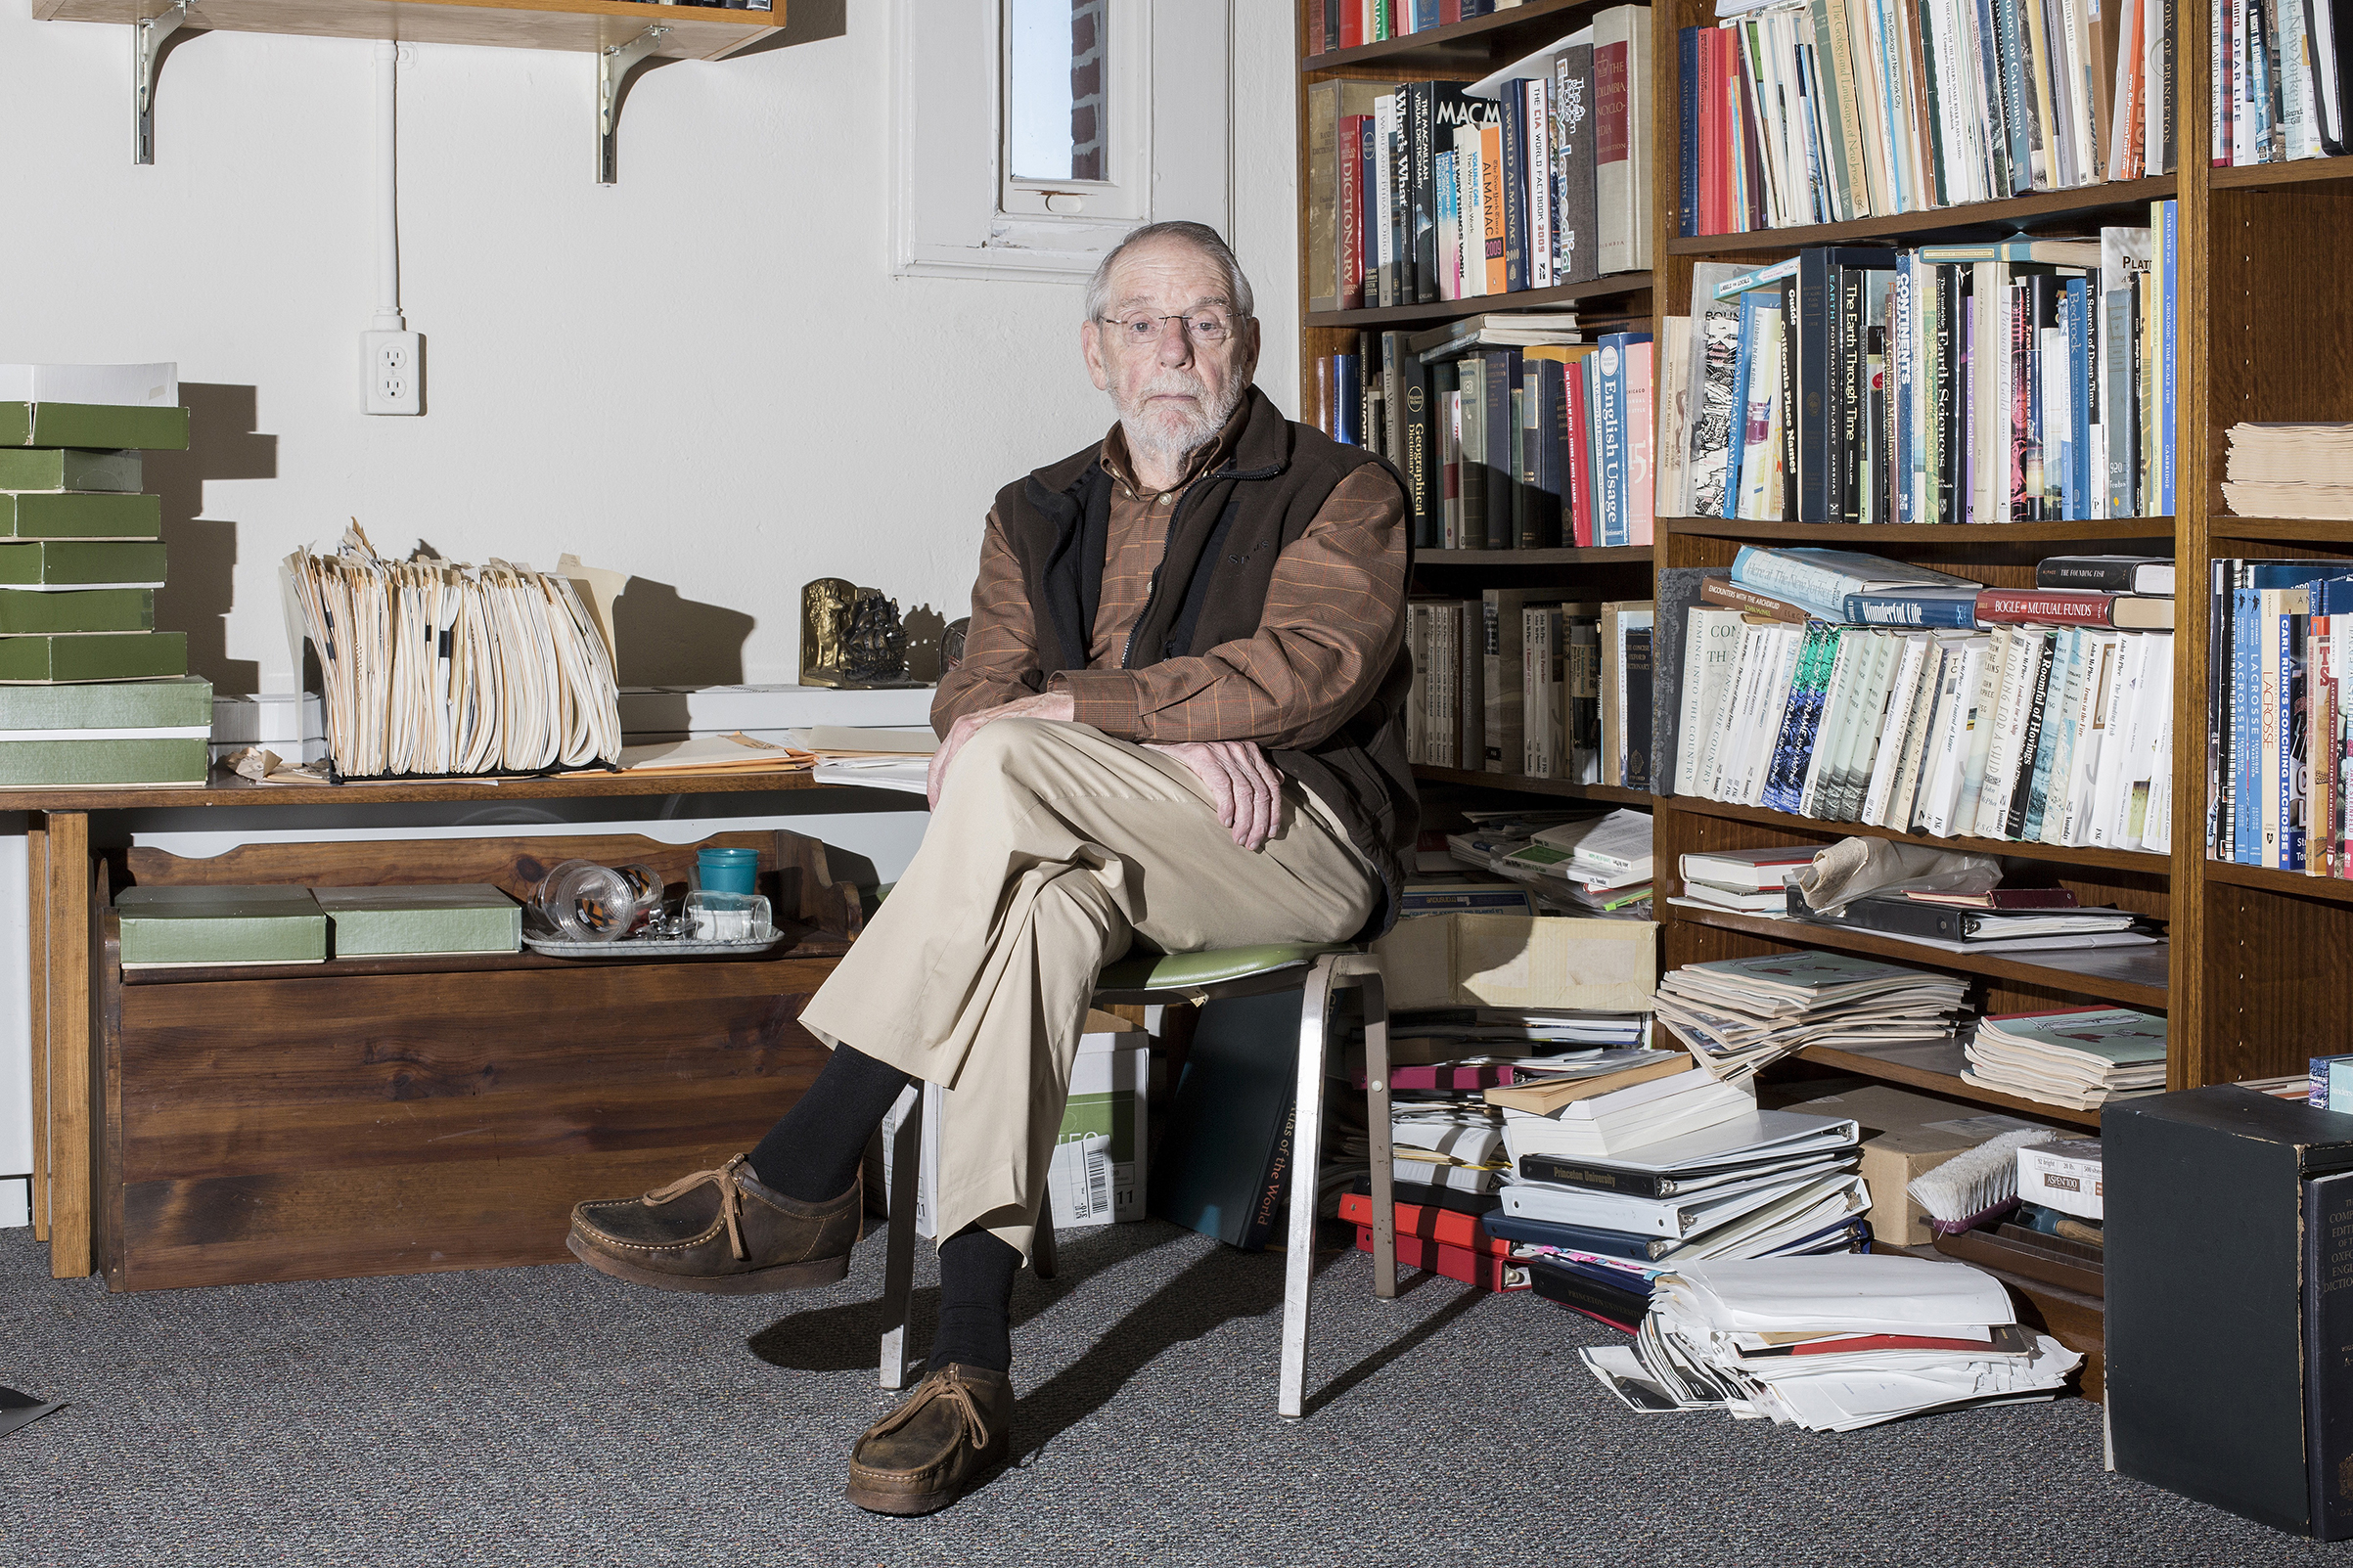 Writer John McPhee poses for a portrait in his office at Princeton University in Princeton, N.J. (Bryan Anselm—Redux for TIME)